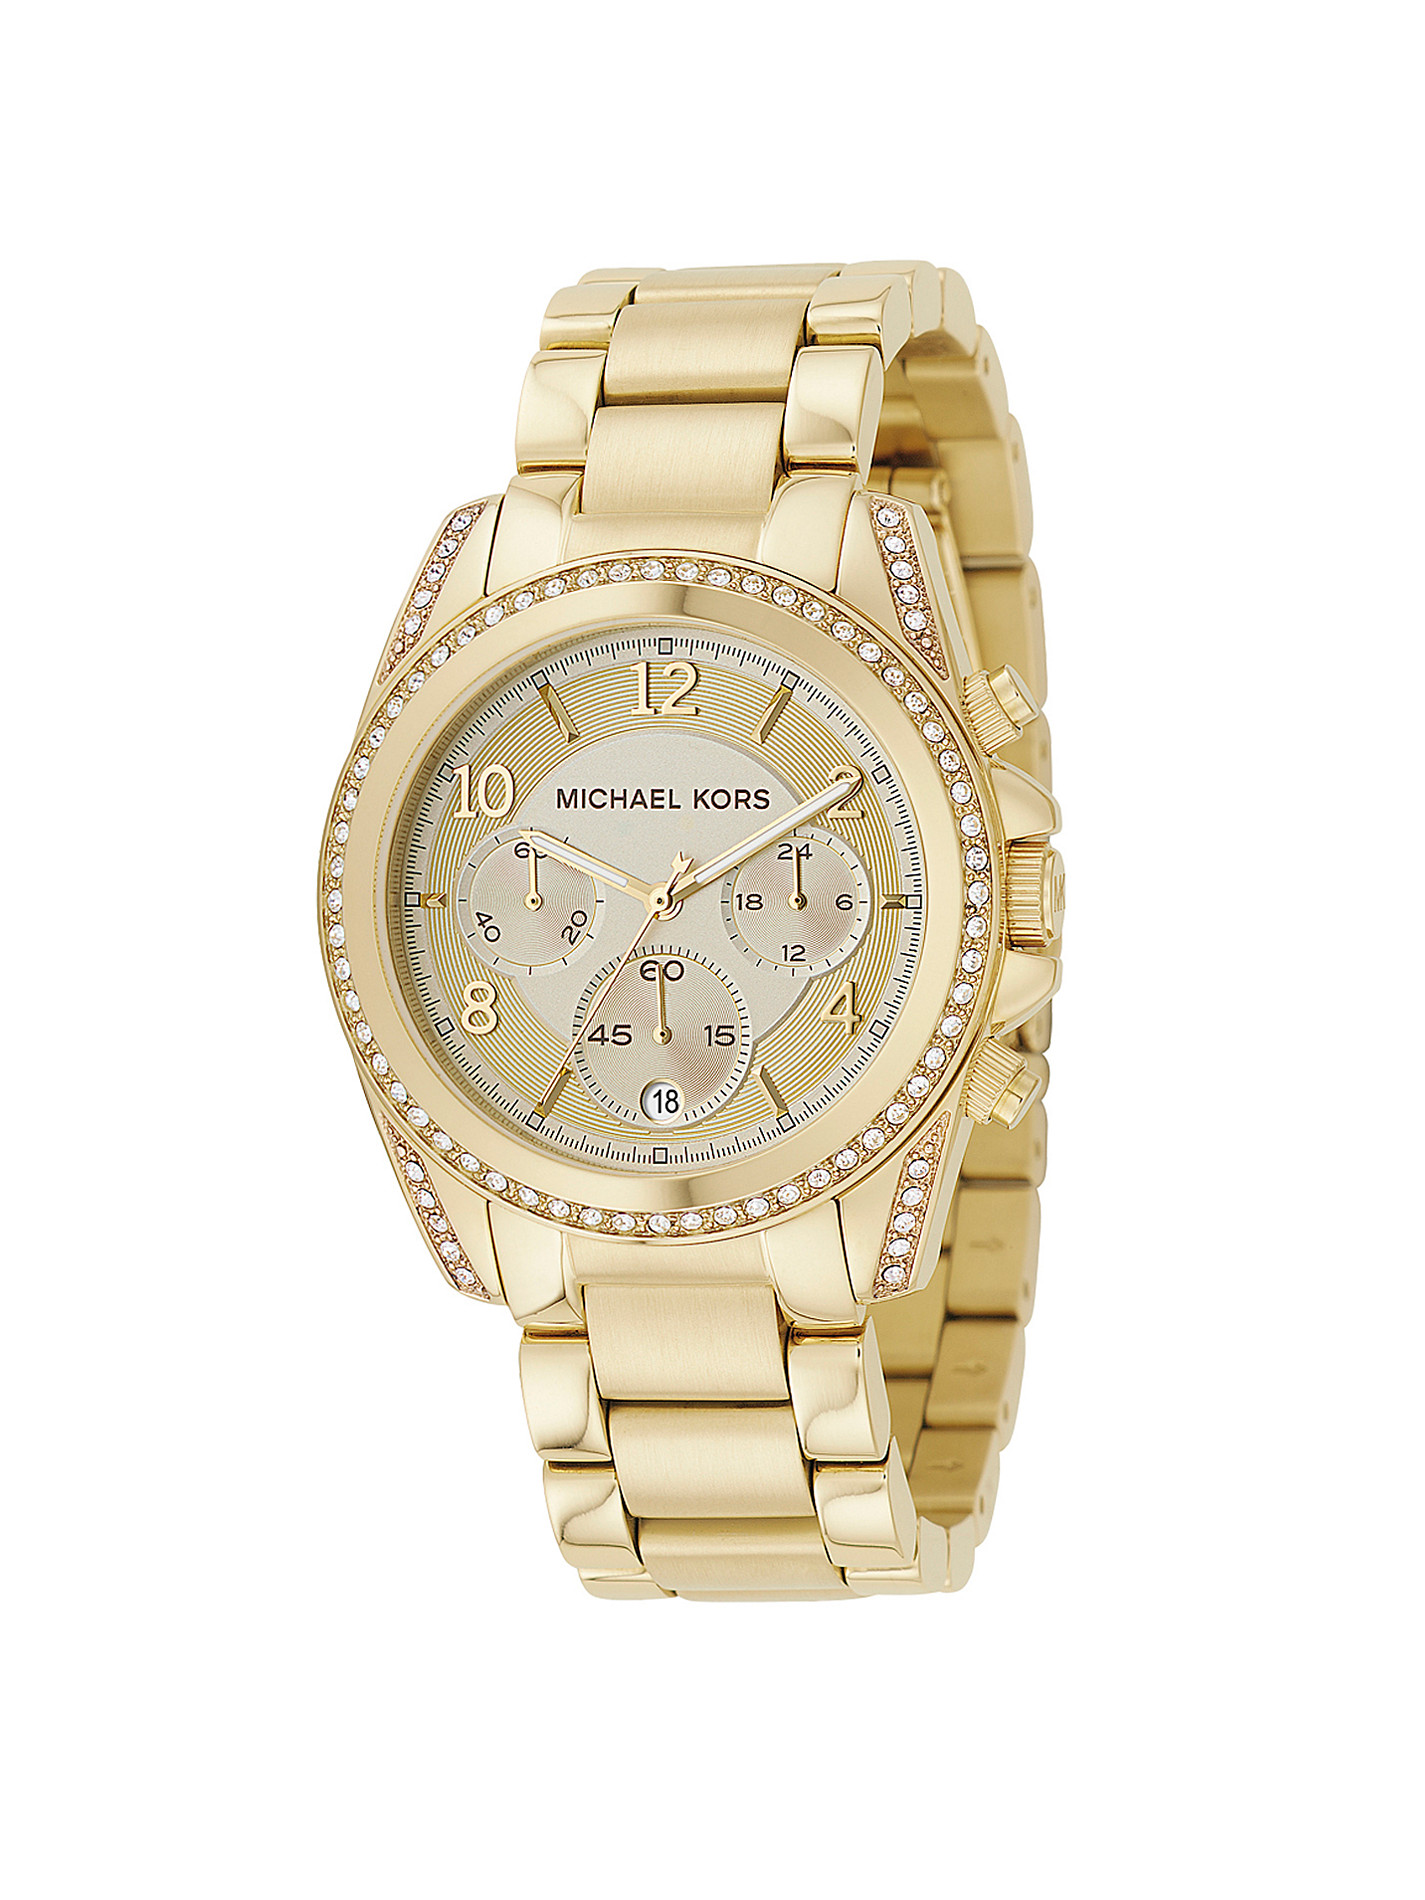 Montre Nelly.com, Blair Michael Kors Watches Or